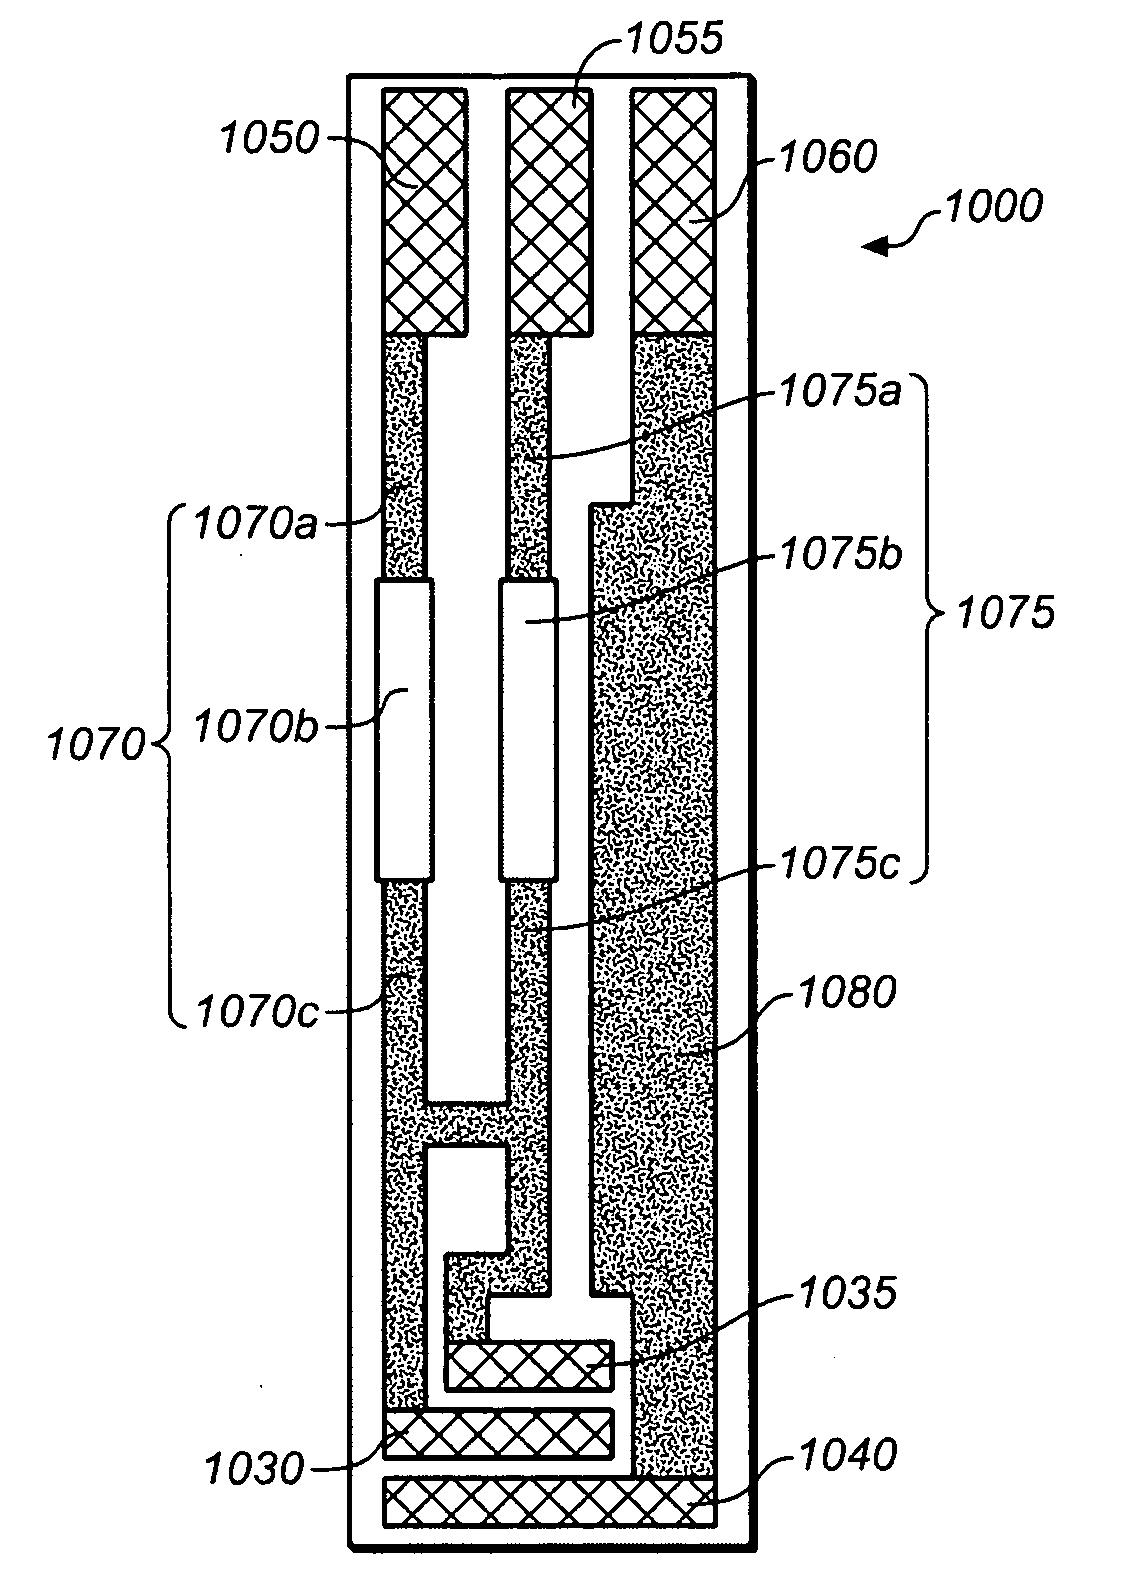 Method for manufacturing a strip for use with a multi-input meter